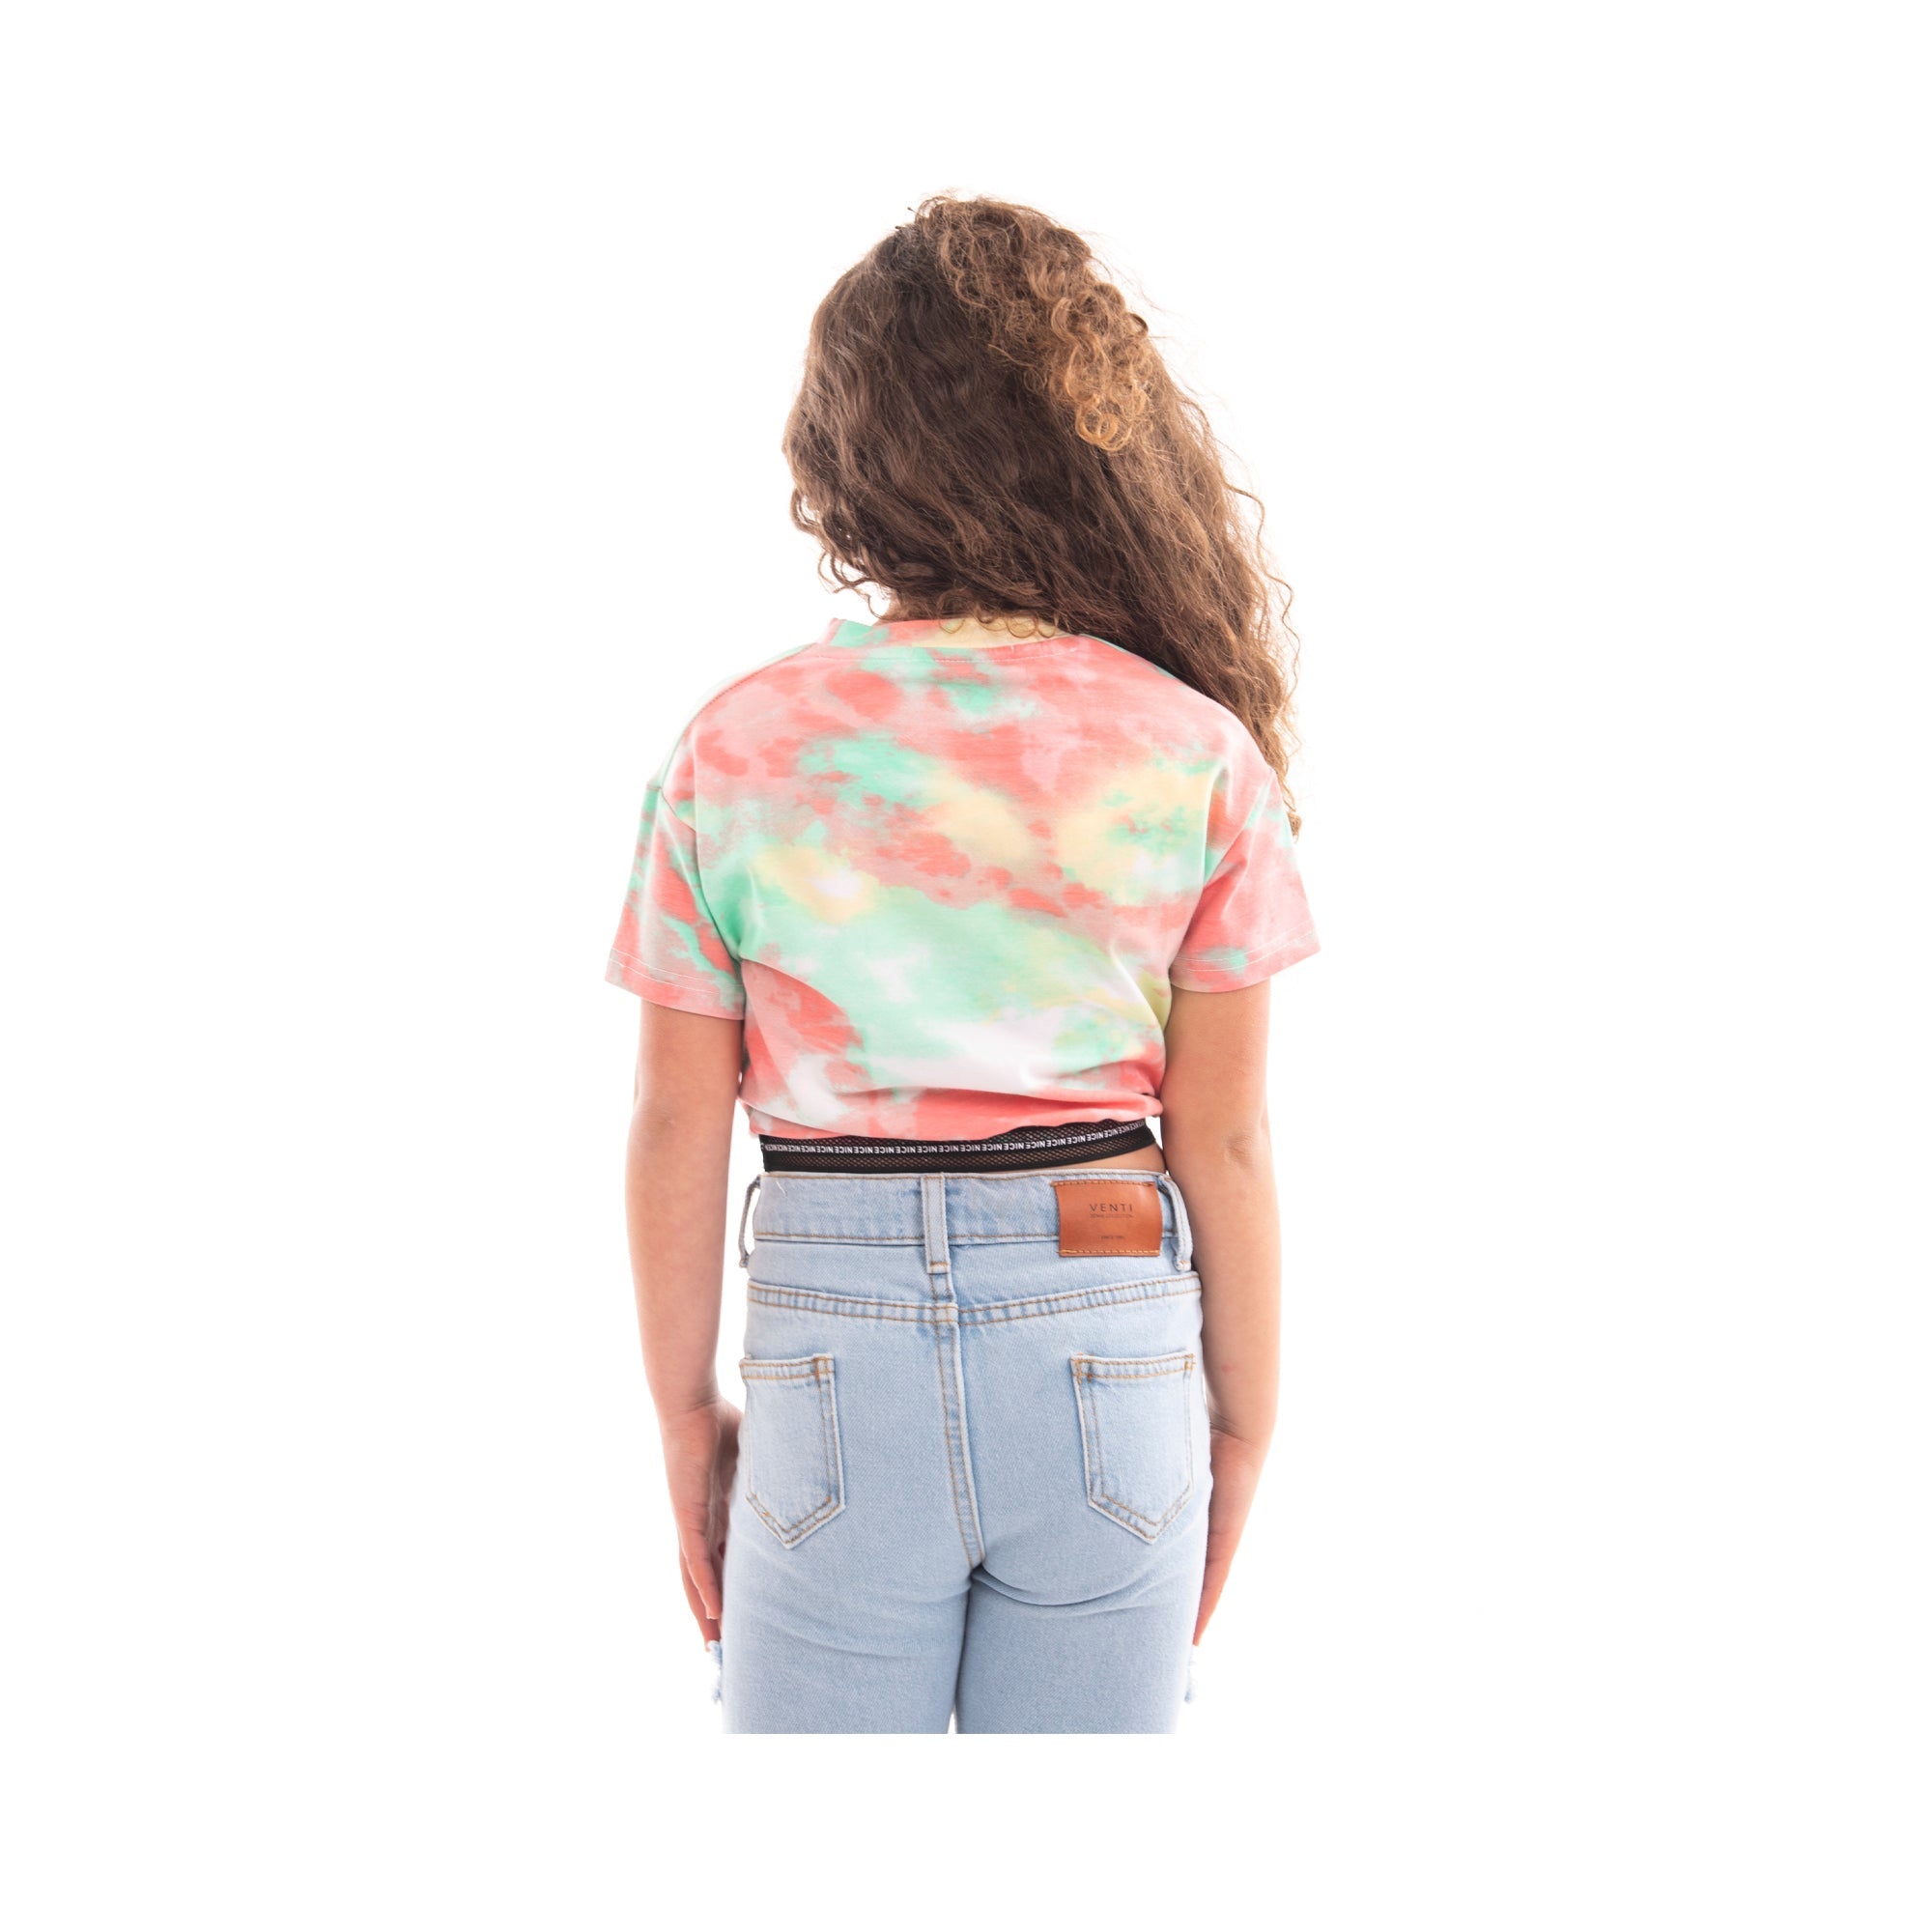 Venti Tie Dye Crop Top with Text for Girl 404047, Target Gender: Girls, Color Family: Multicolor, Material: Mixed Materials, Target Age: 12 - 18 Months, 3 image